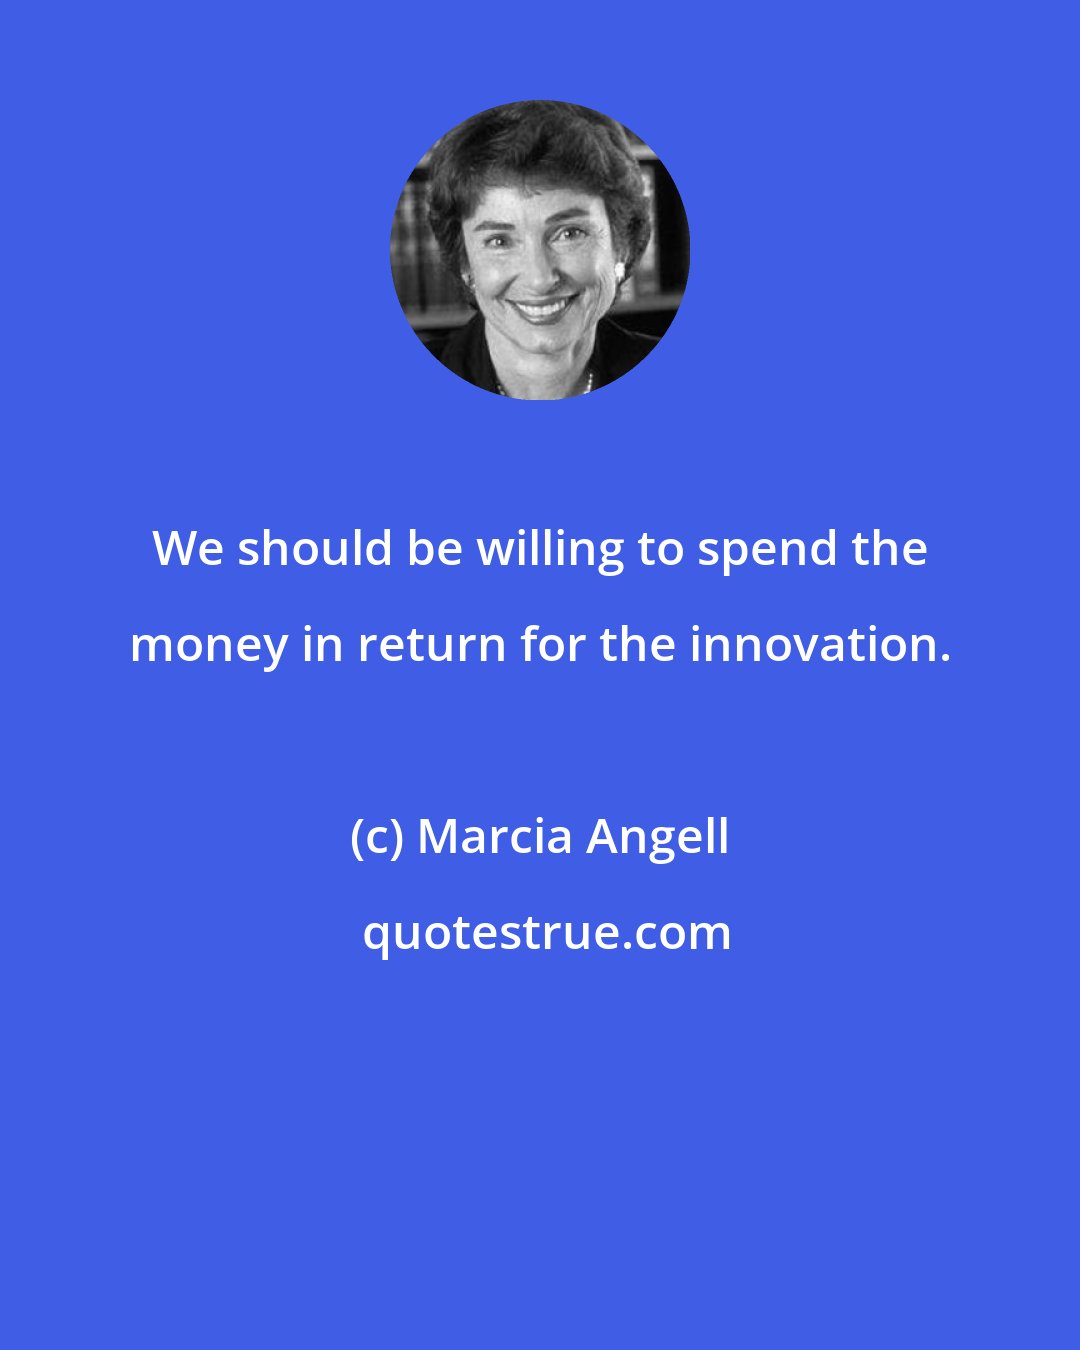 Marcia Angell: We should be willing to spend the money in return for the innovation.